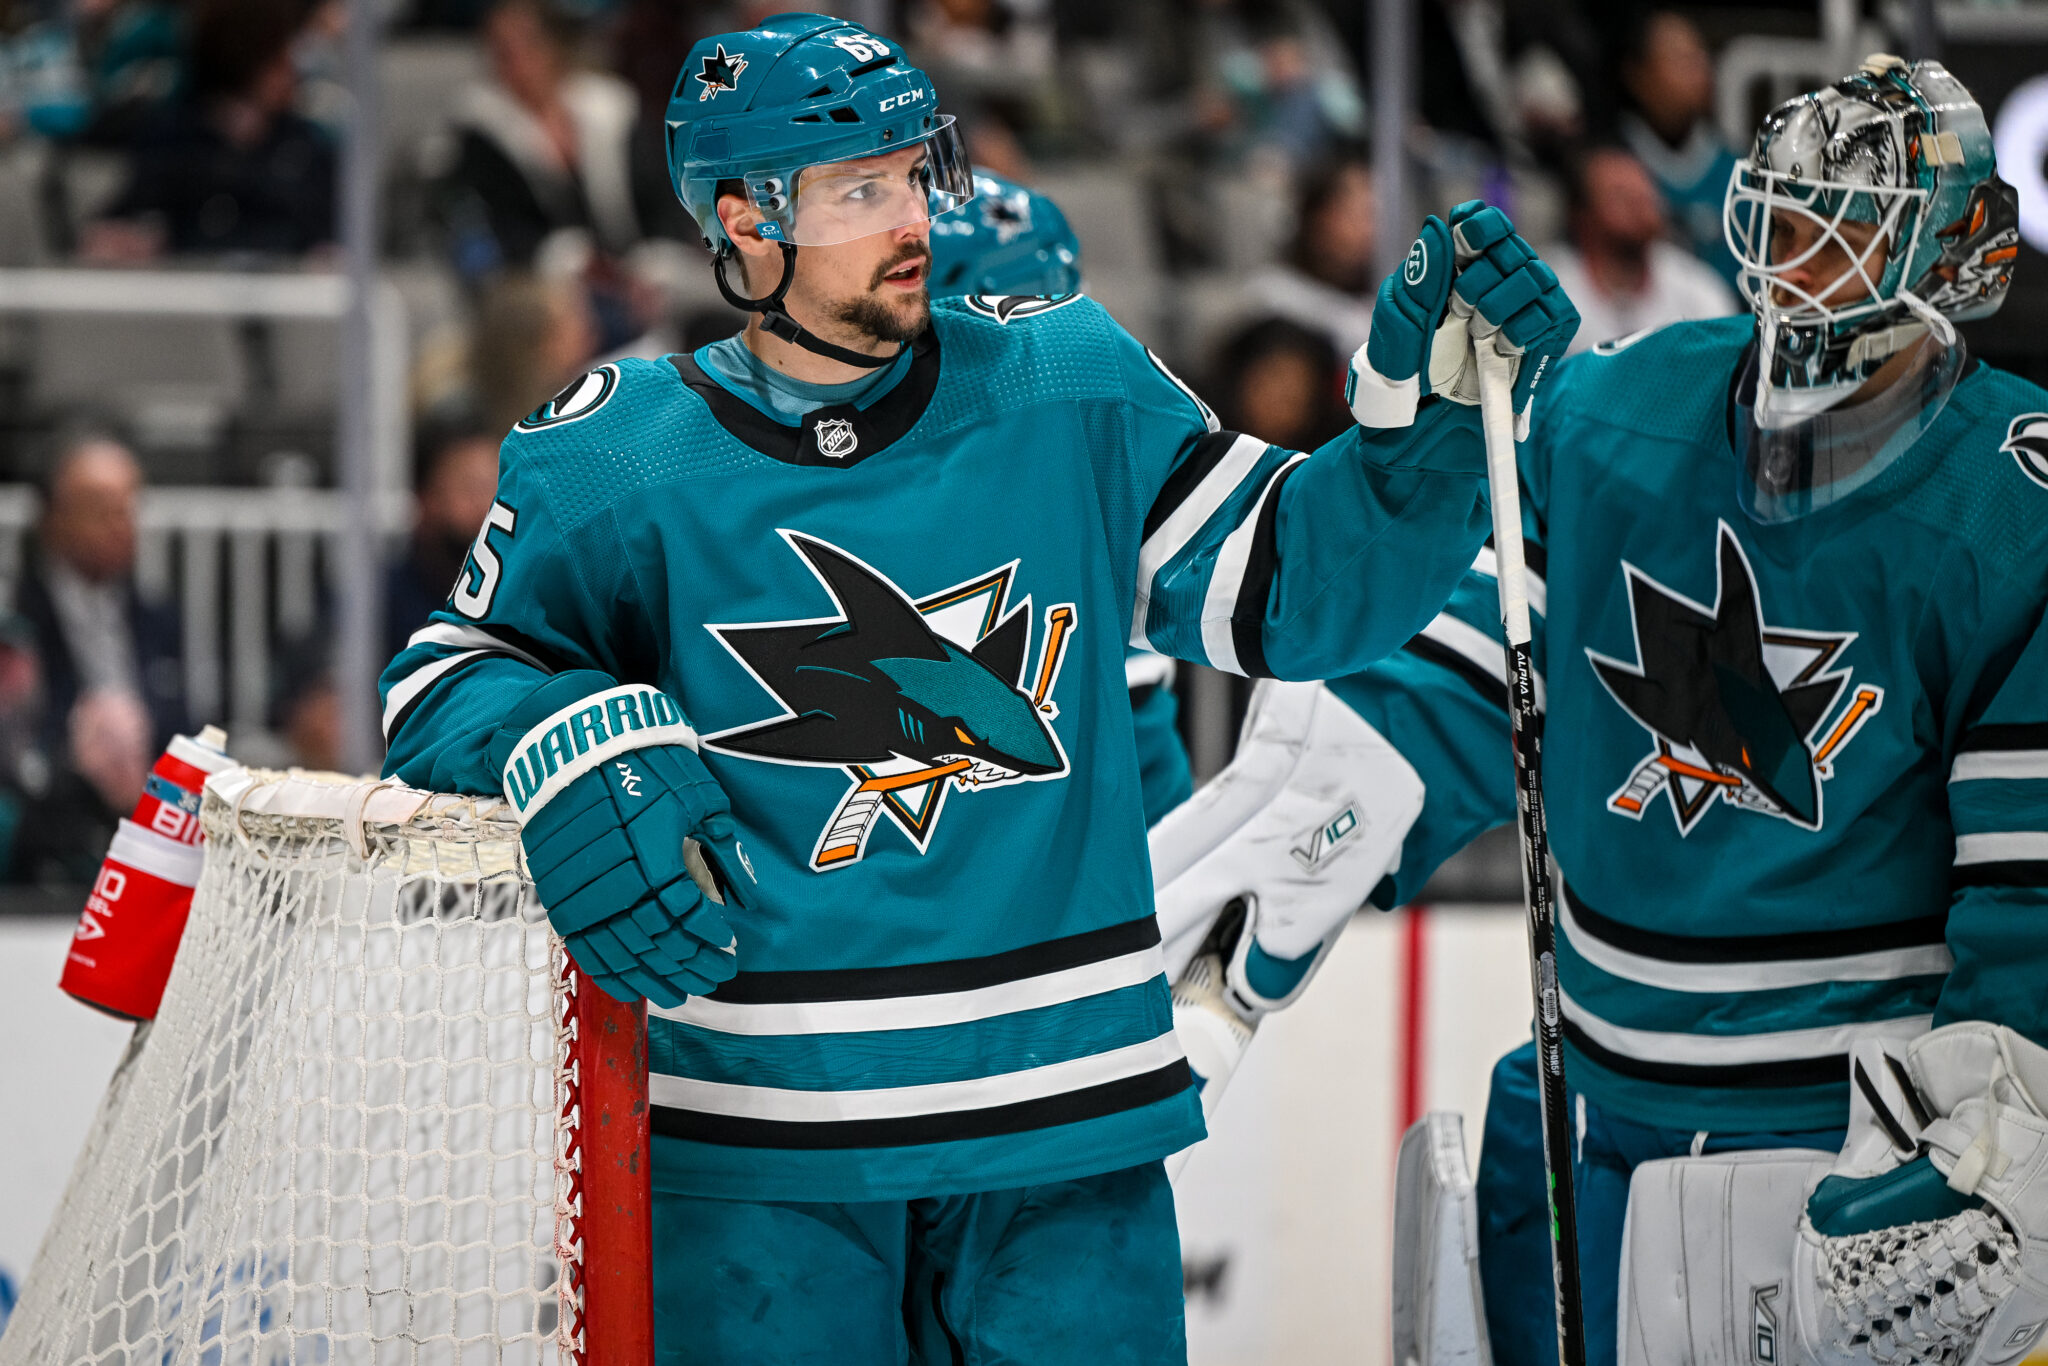 Playoff run ends for Sharks in 5-1 loss to Blues